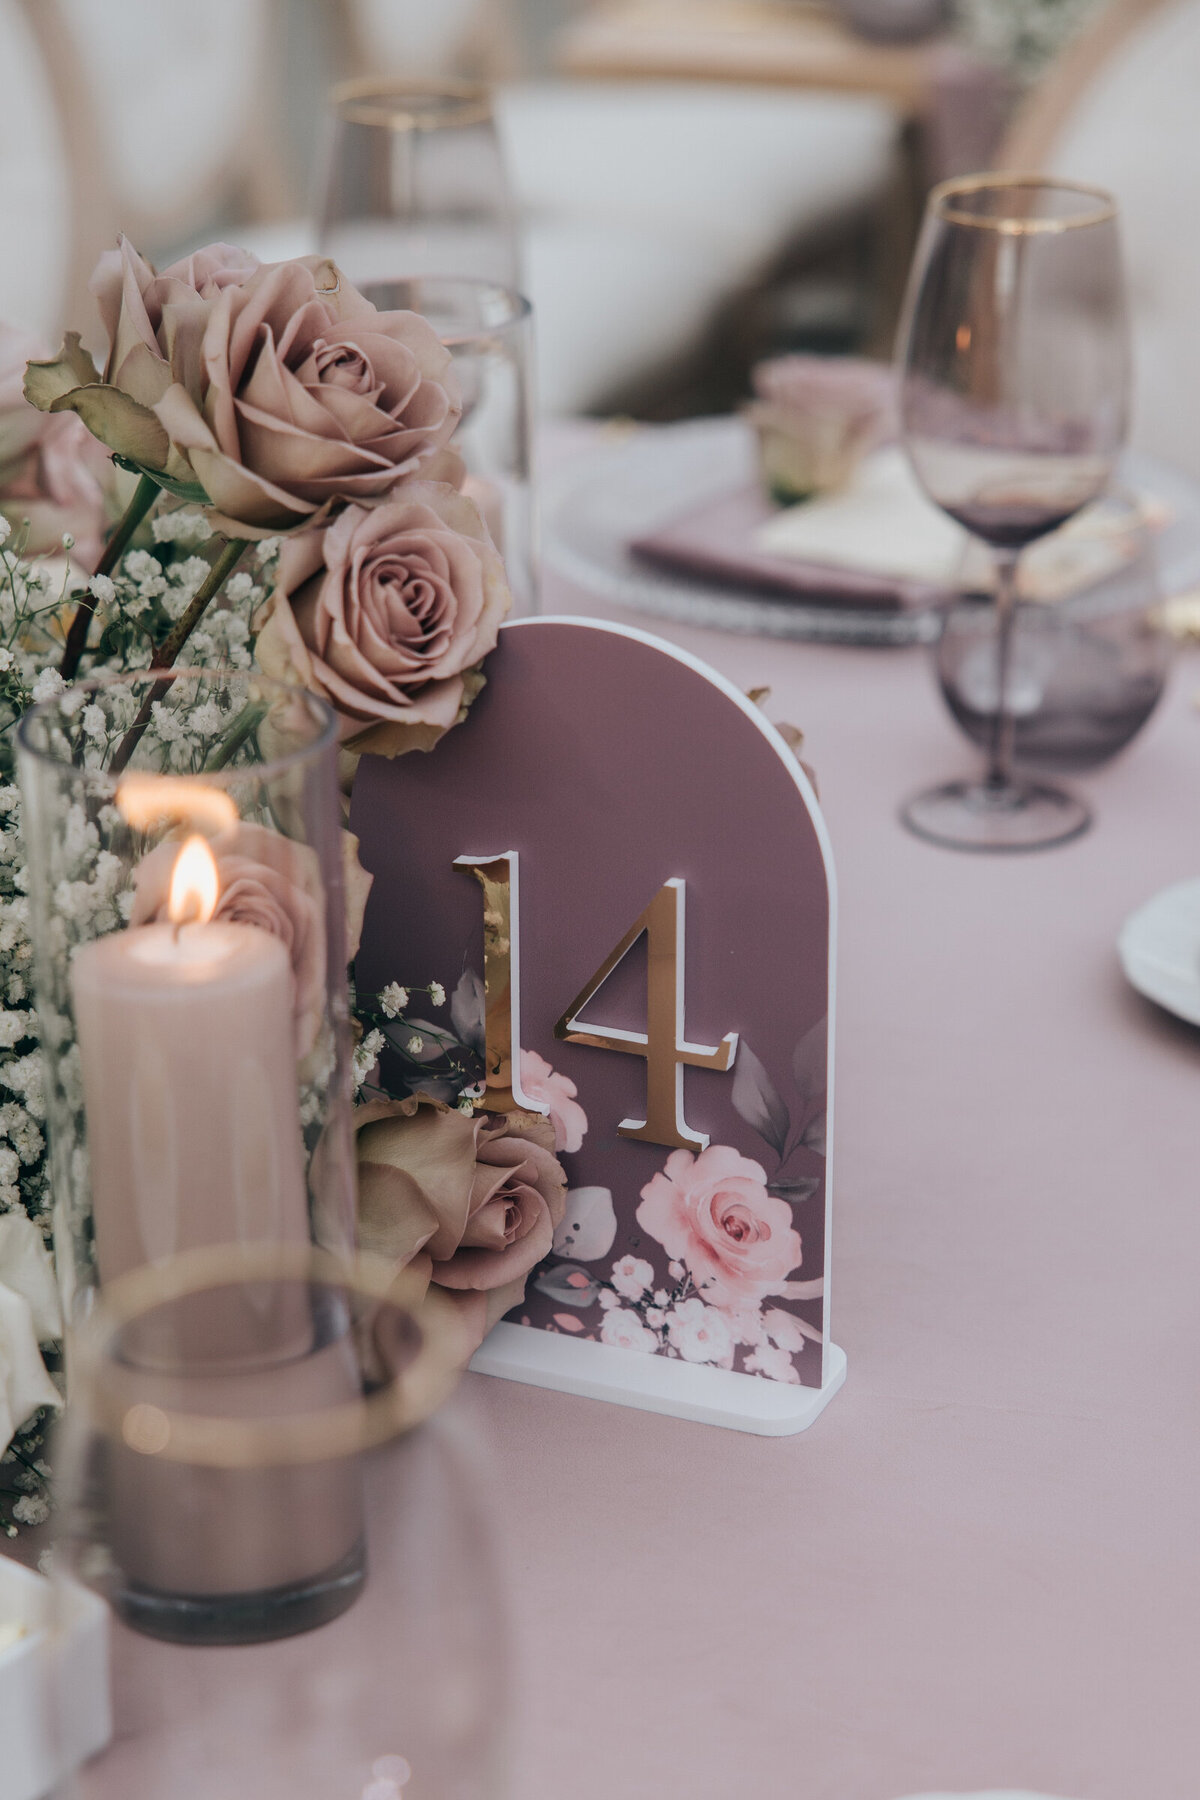 Lavender and floral themed table number at glamorous wedding